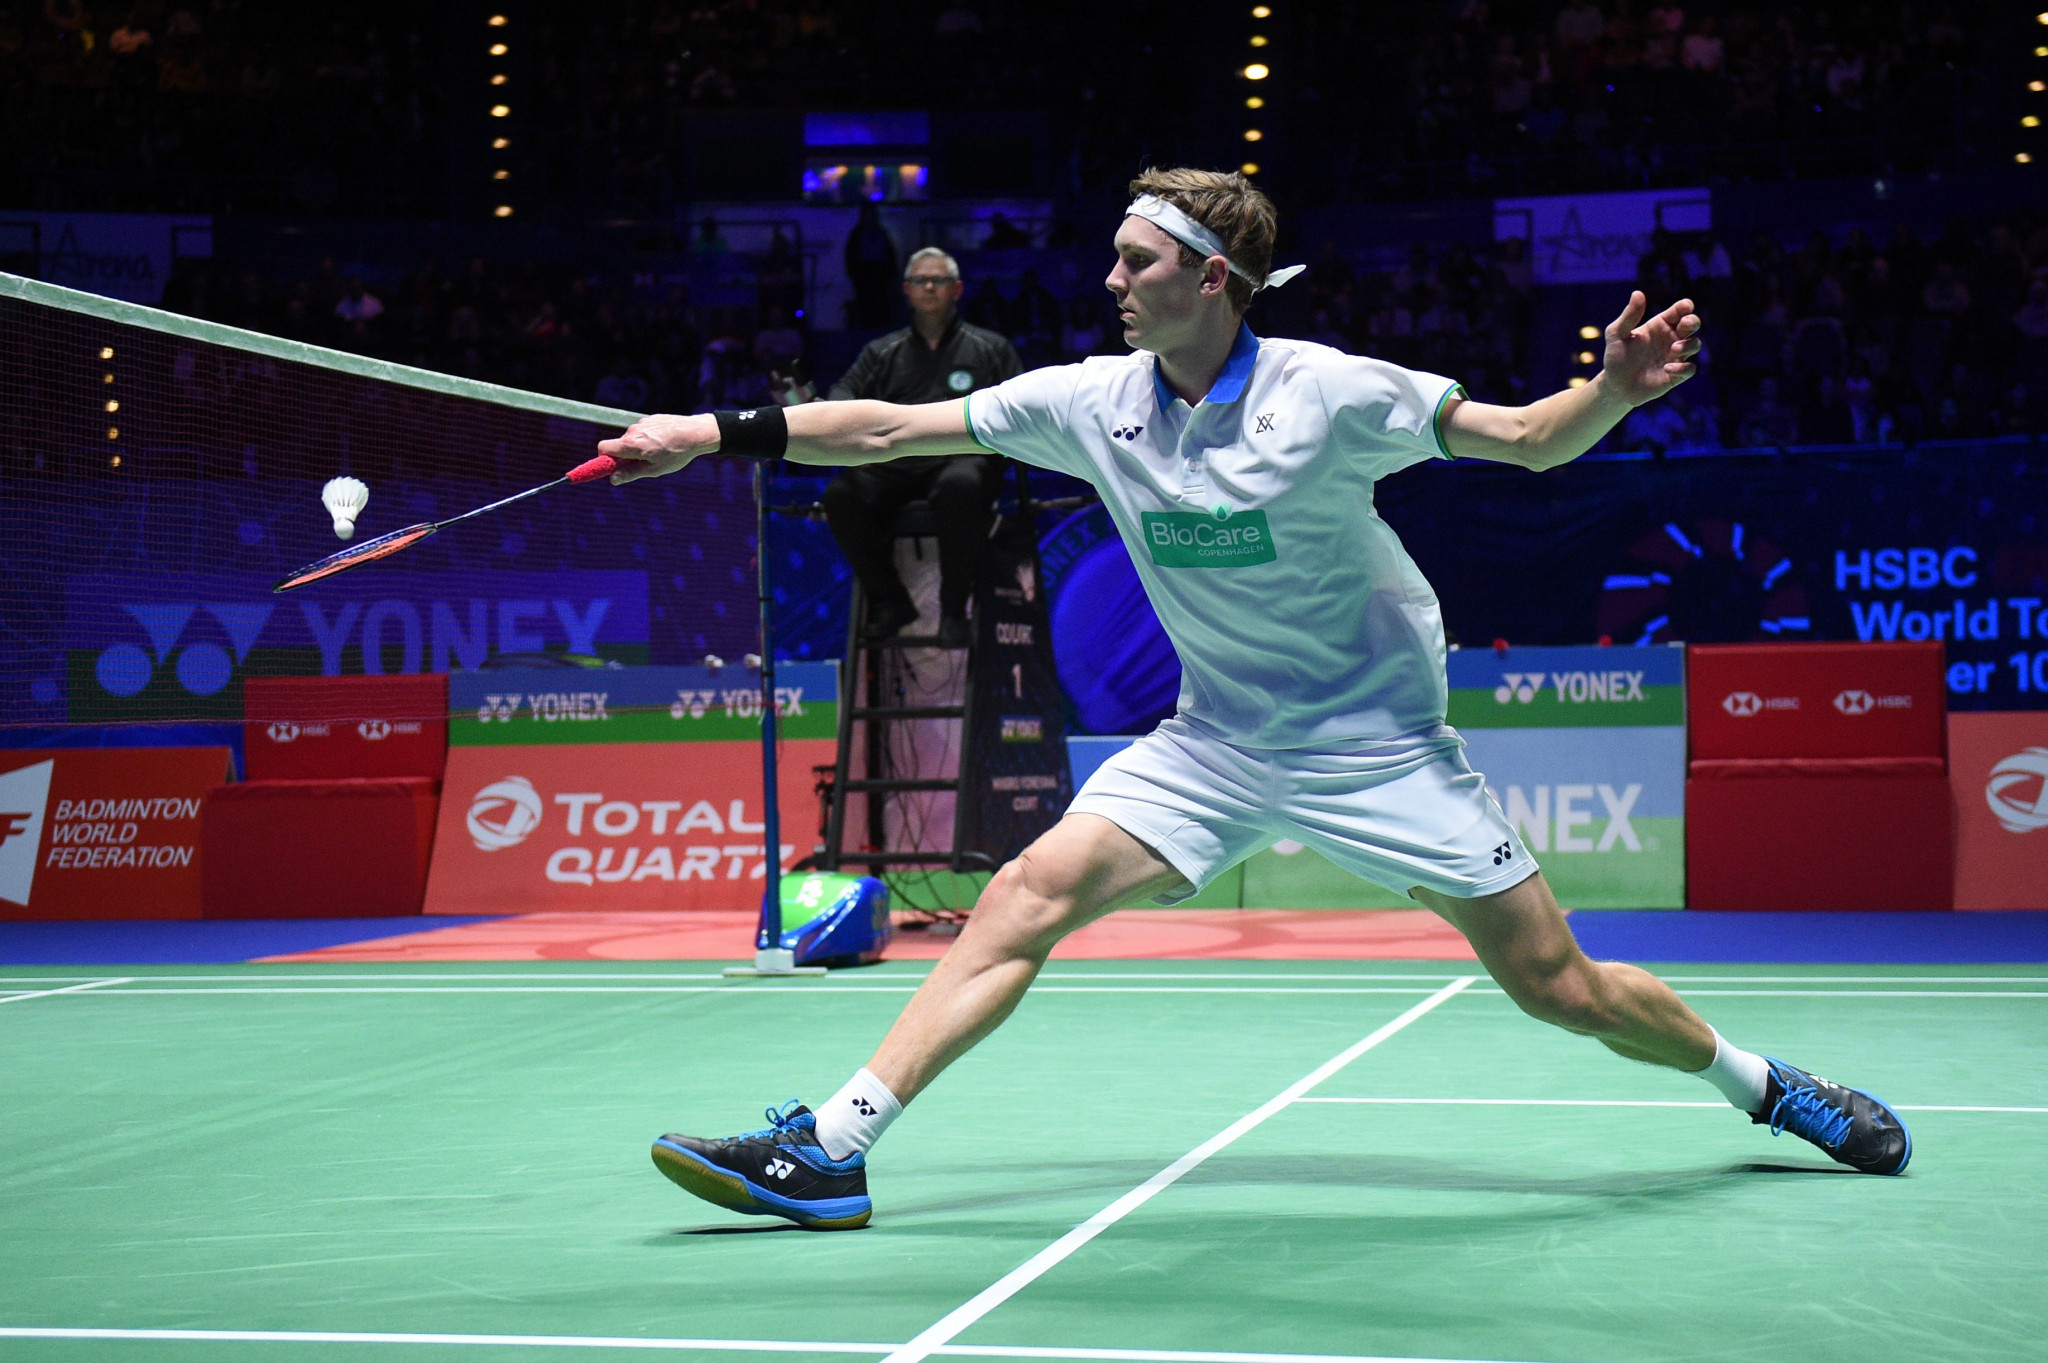 Axelsen and Marín named top seeds for BWF World Tour Finals